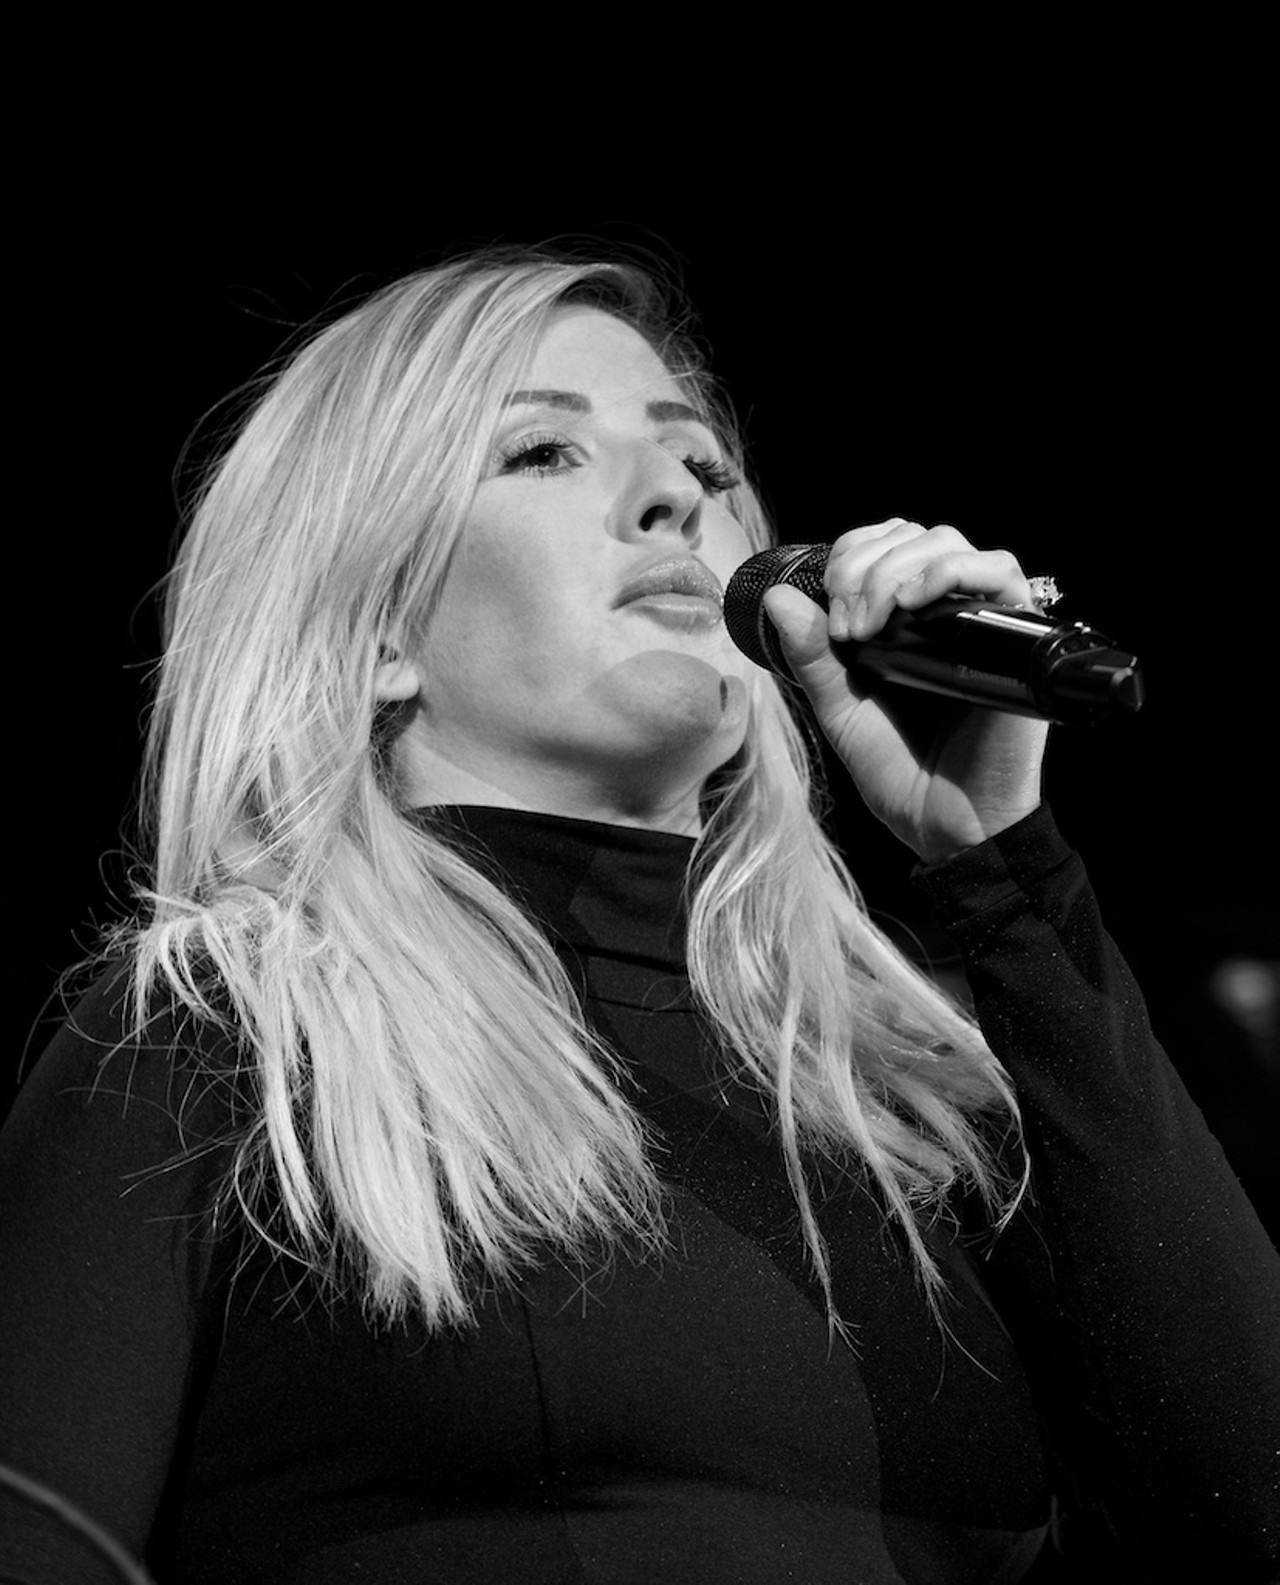 Ellie Goulding Performing at Jacobs Pavilion at Nautica